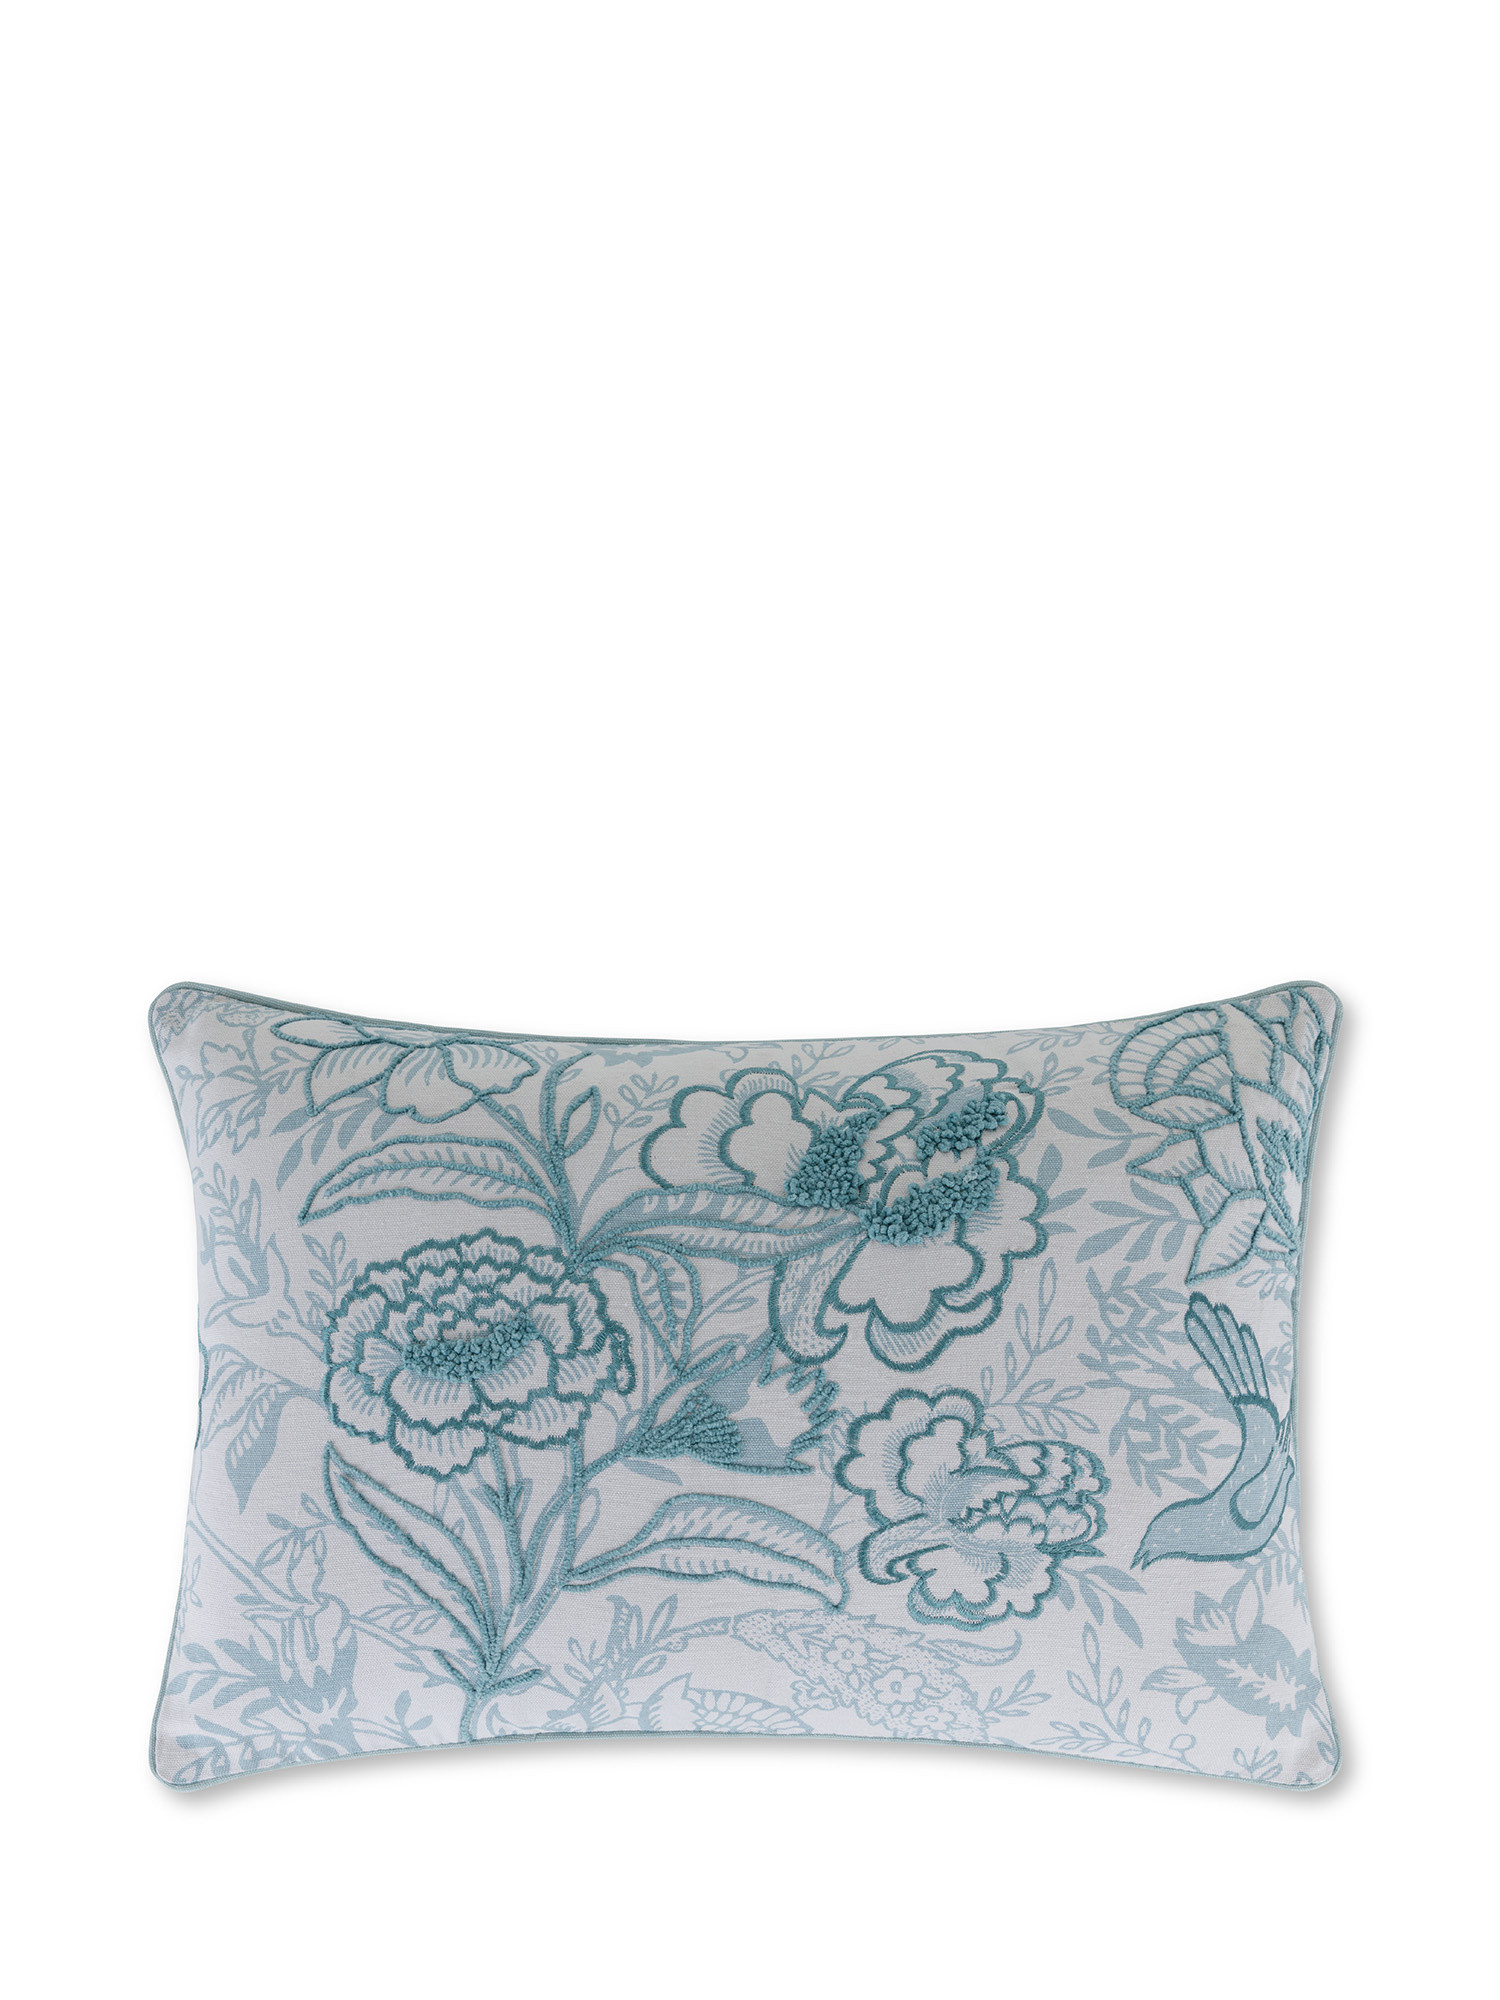 Cushion with flowers embroidered in relief 35x50 cm, Light Blue, large image number 0